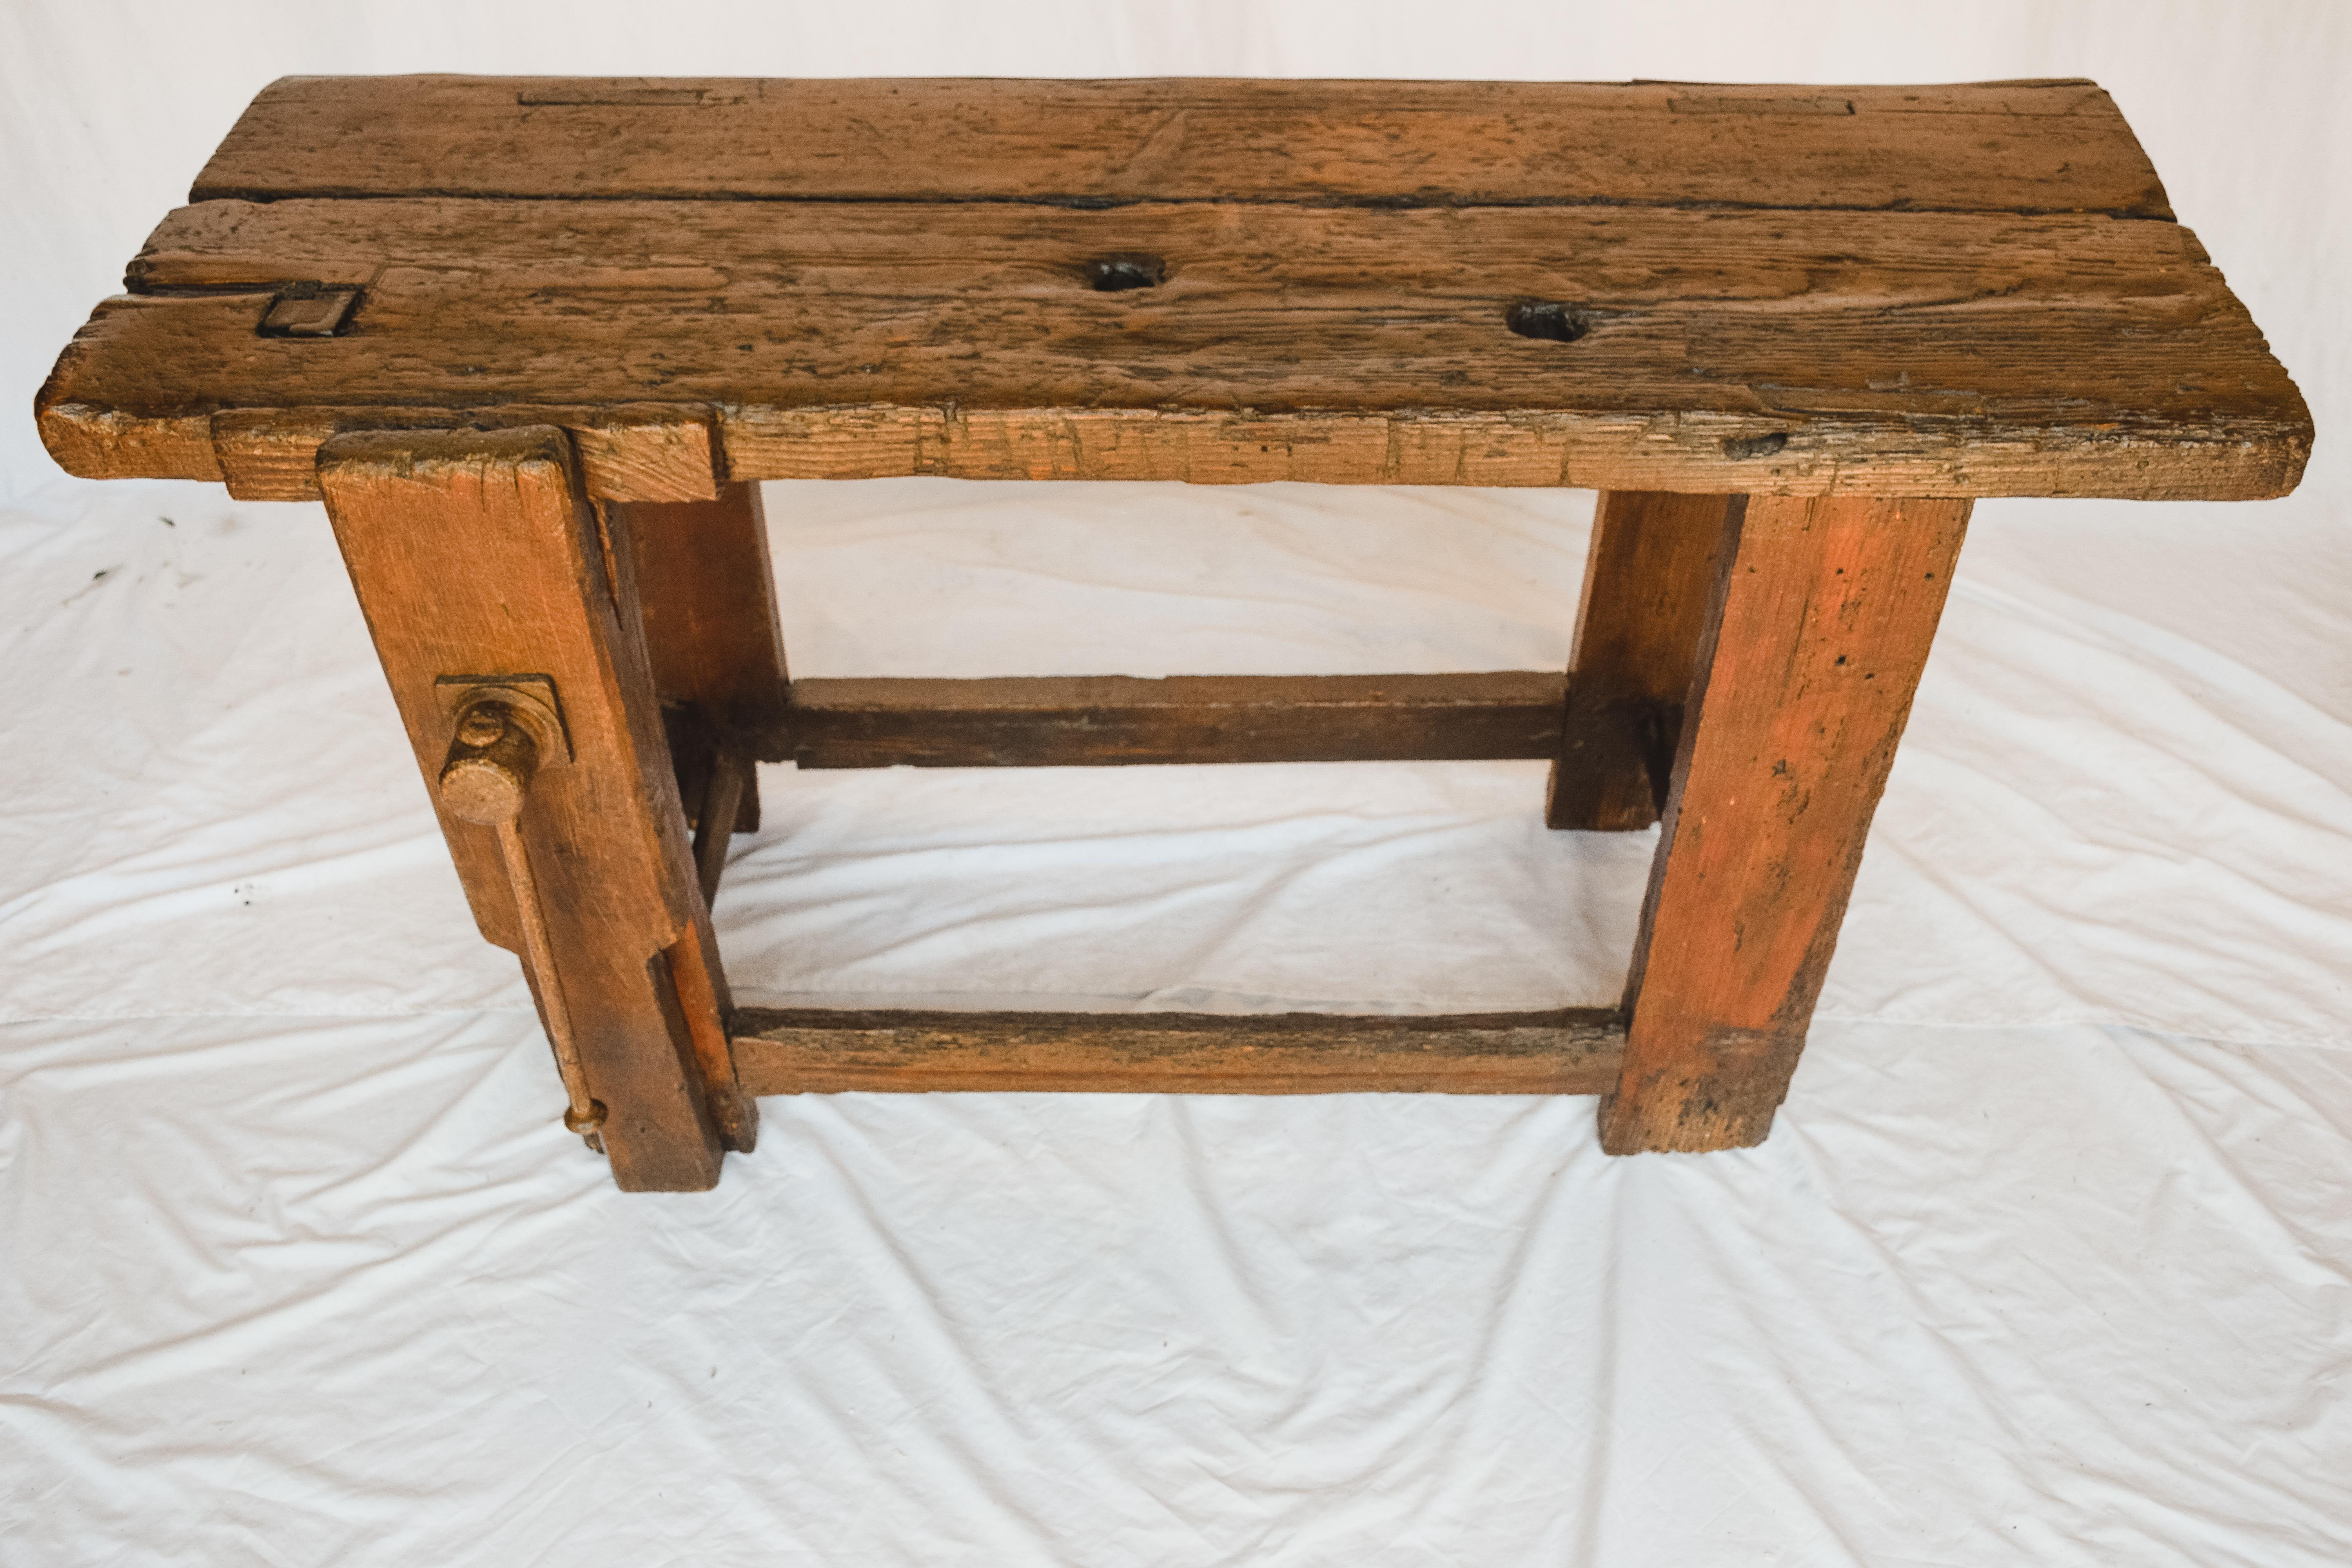 This beautiful 19th century workbench is made of solid wood and has a beautiful oak patina and original vise grip.  Originally used as a carpenter's workbench, the thick oak top sitting on sturdy square legs, shows its years of use.  Would be